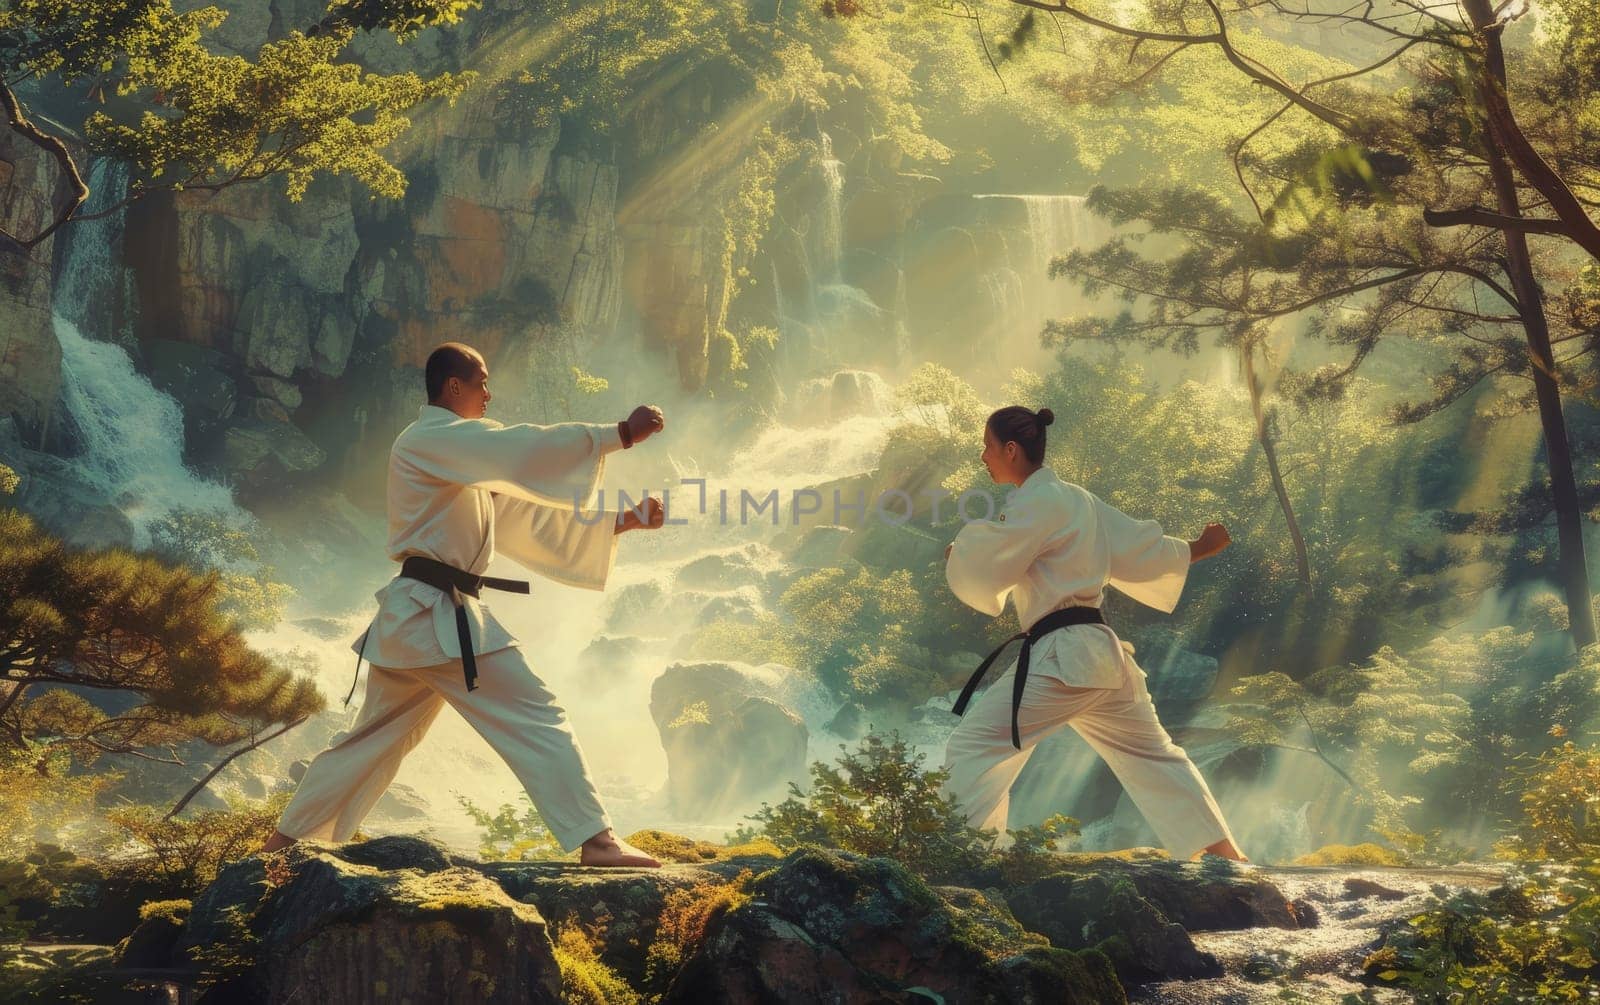 Two martial artists in white uniforms practice near a waterfall, surrounded by lush greenery and sunlight